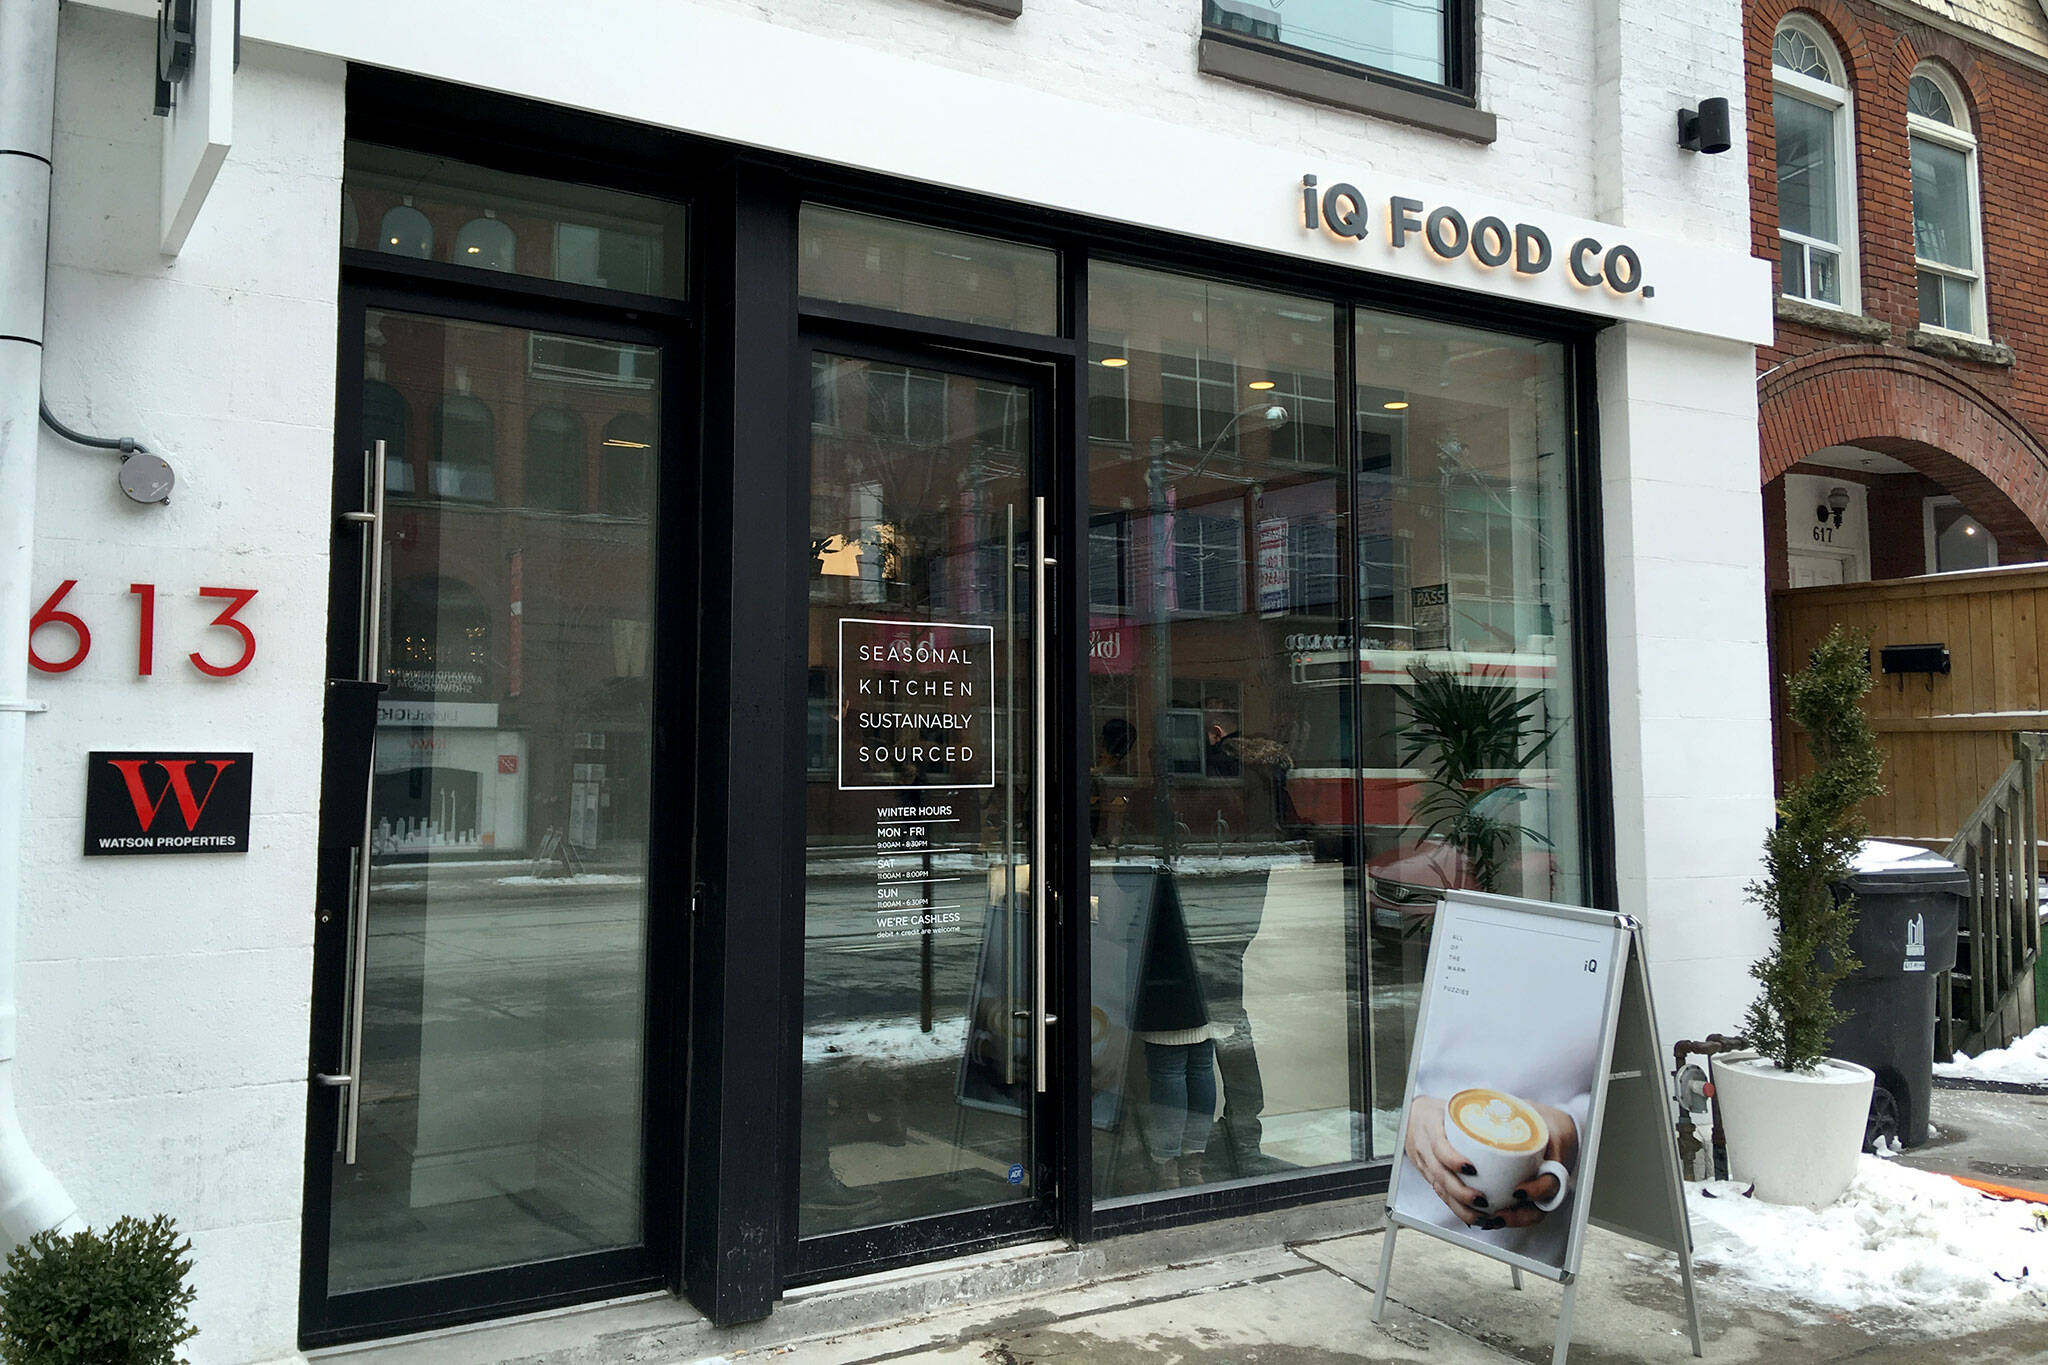 https://media.blogto.com/listings/2018301-iqfood-co-king-west.jpg?w=2048&cmd=resize_then_crop&height=1365&quality=70